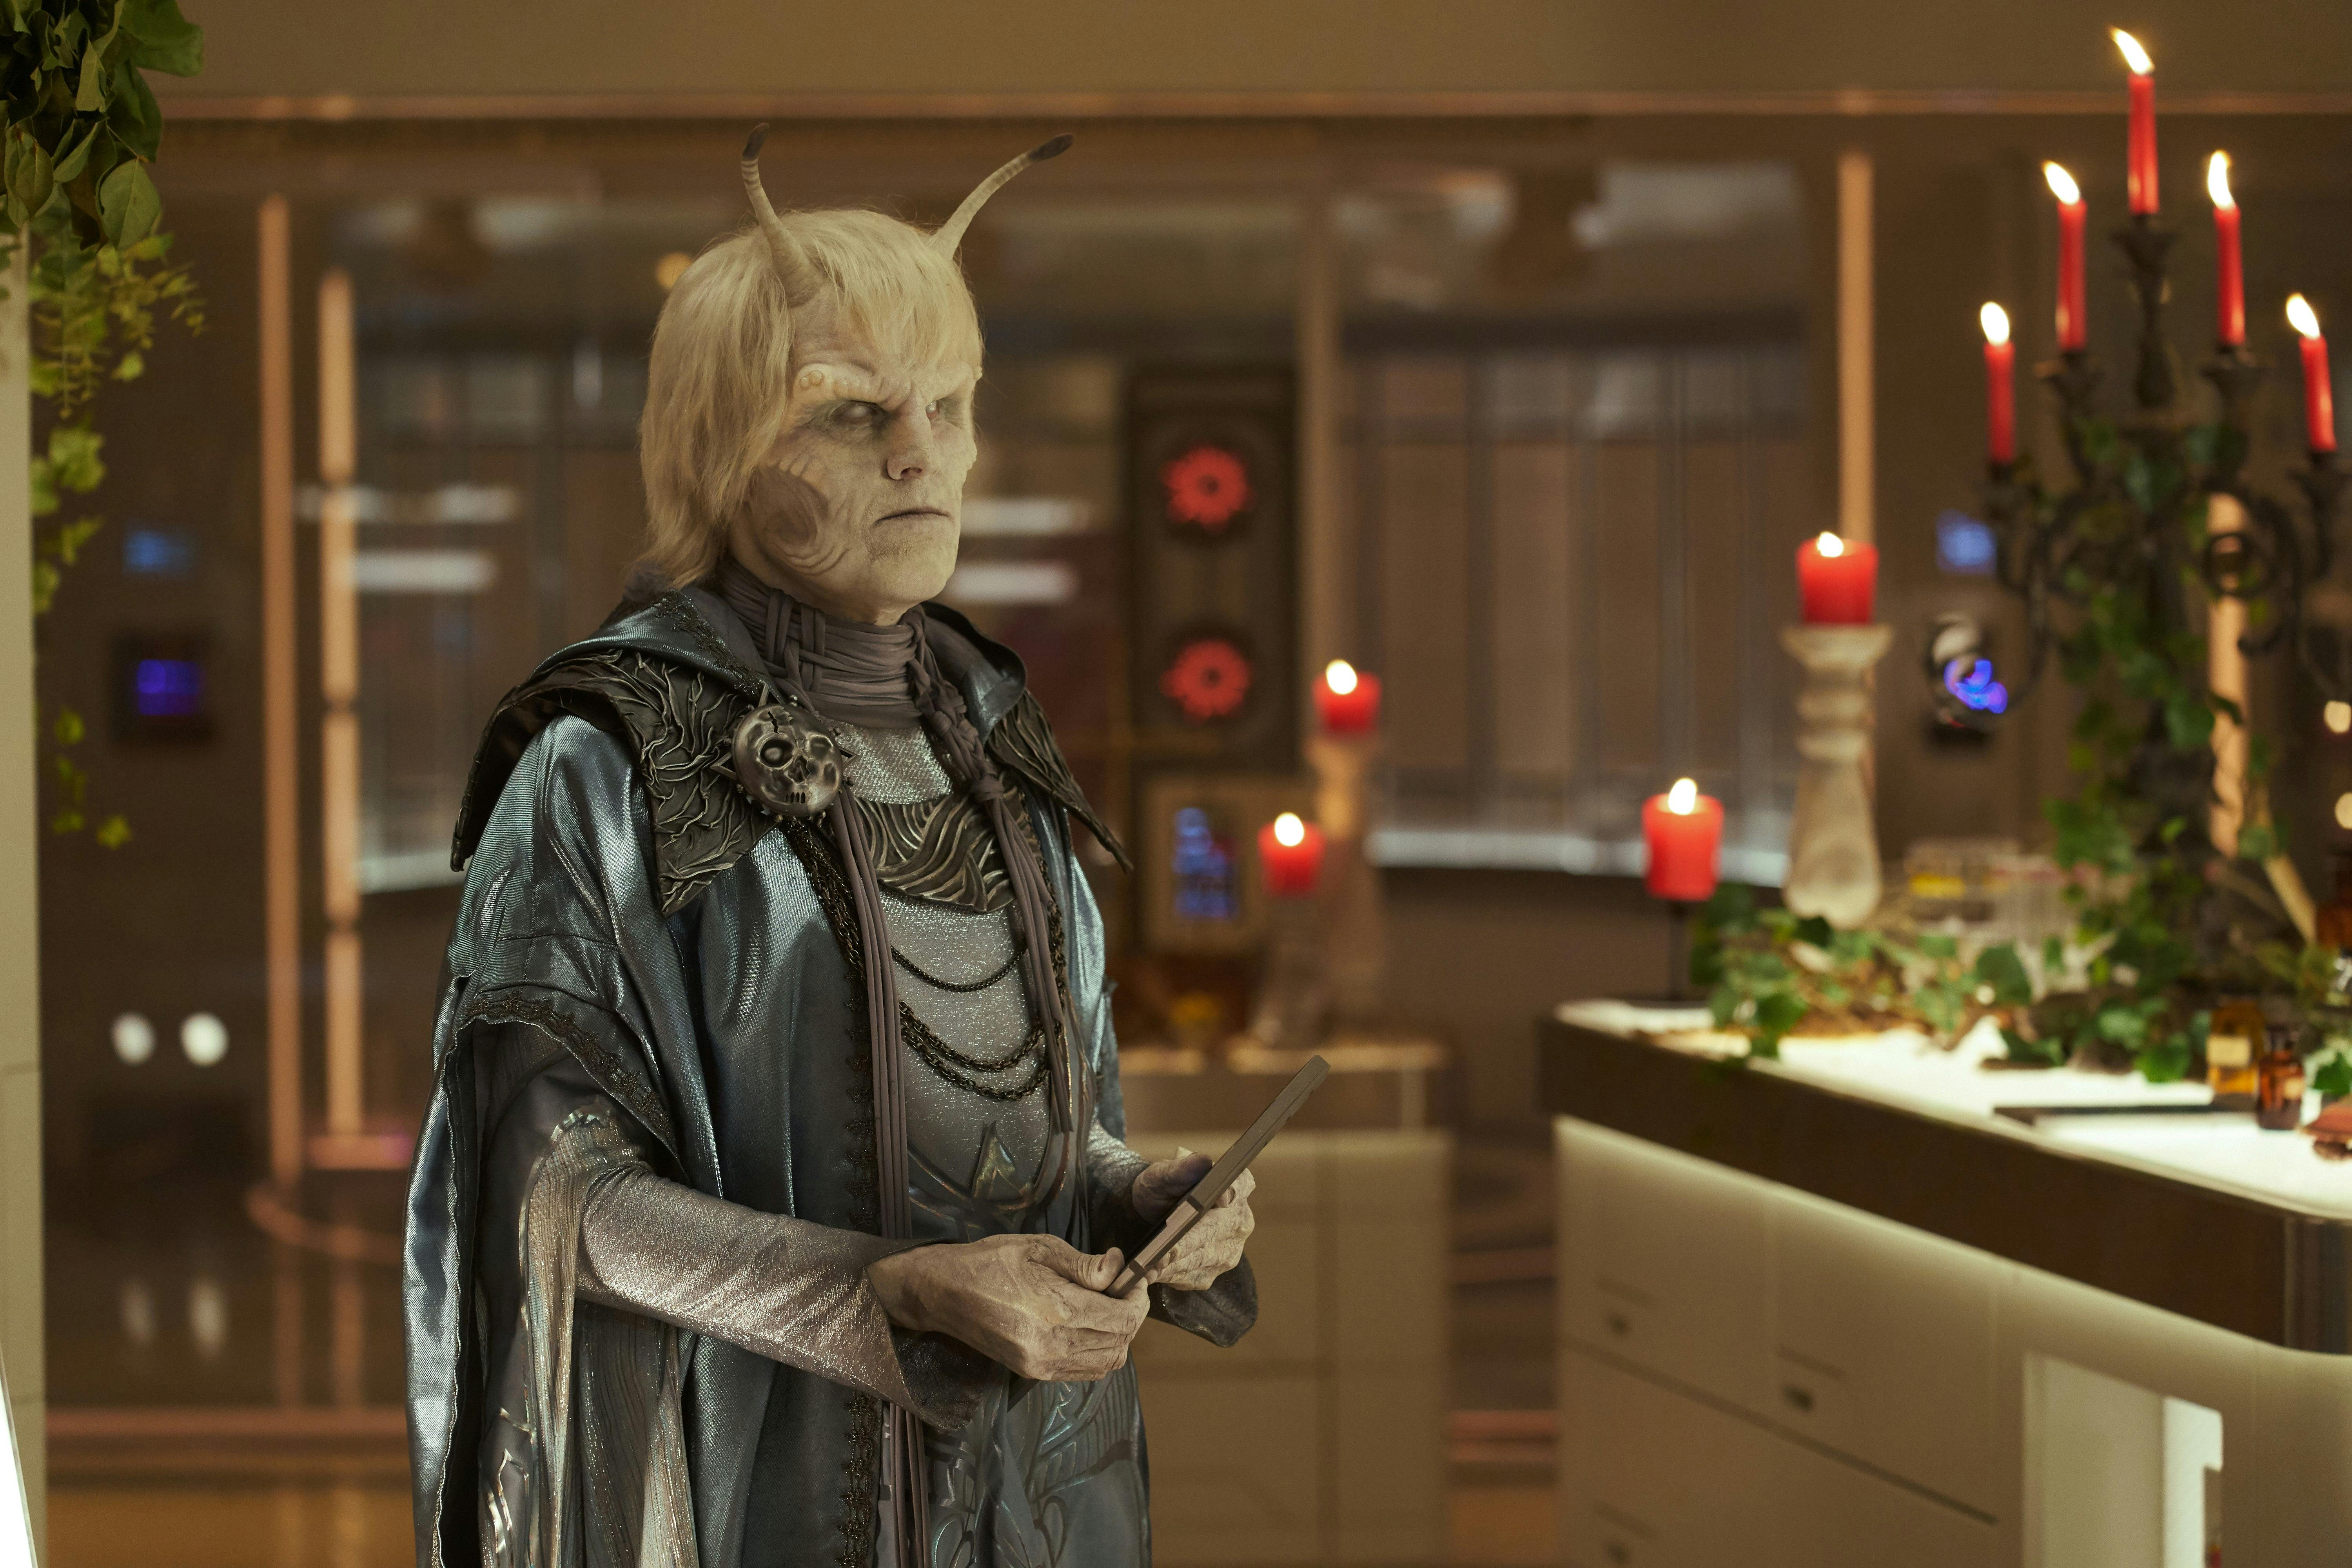 Hemmer (Bruce Horak), wearing elaborate robes, stands in the Enterprise's medbay. The medbay is lit with candles.